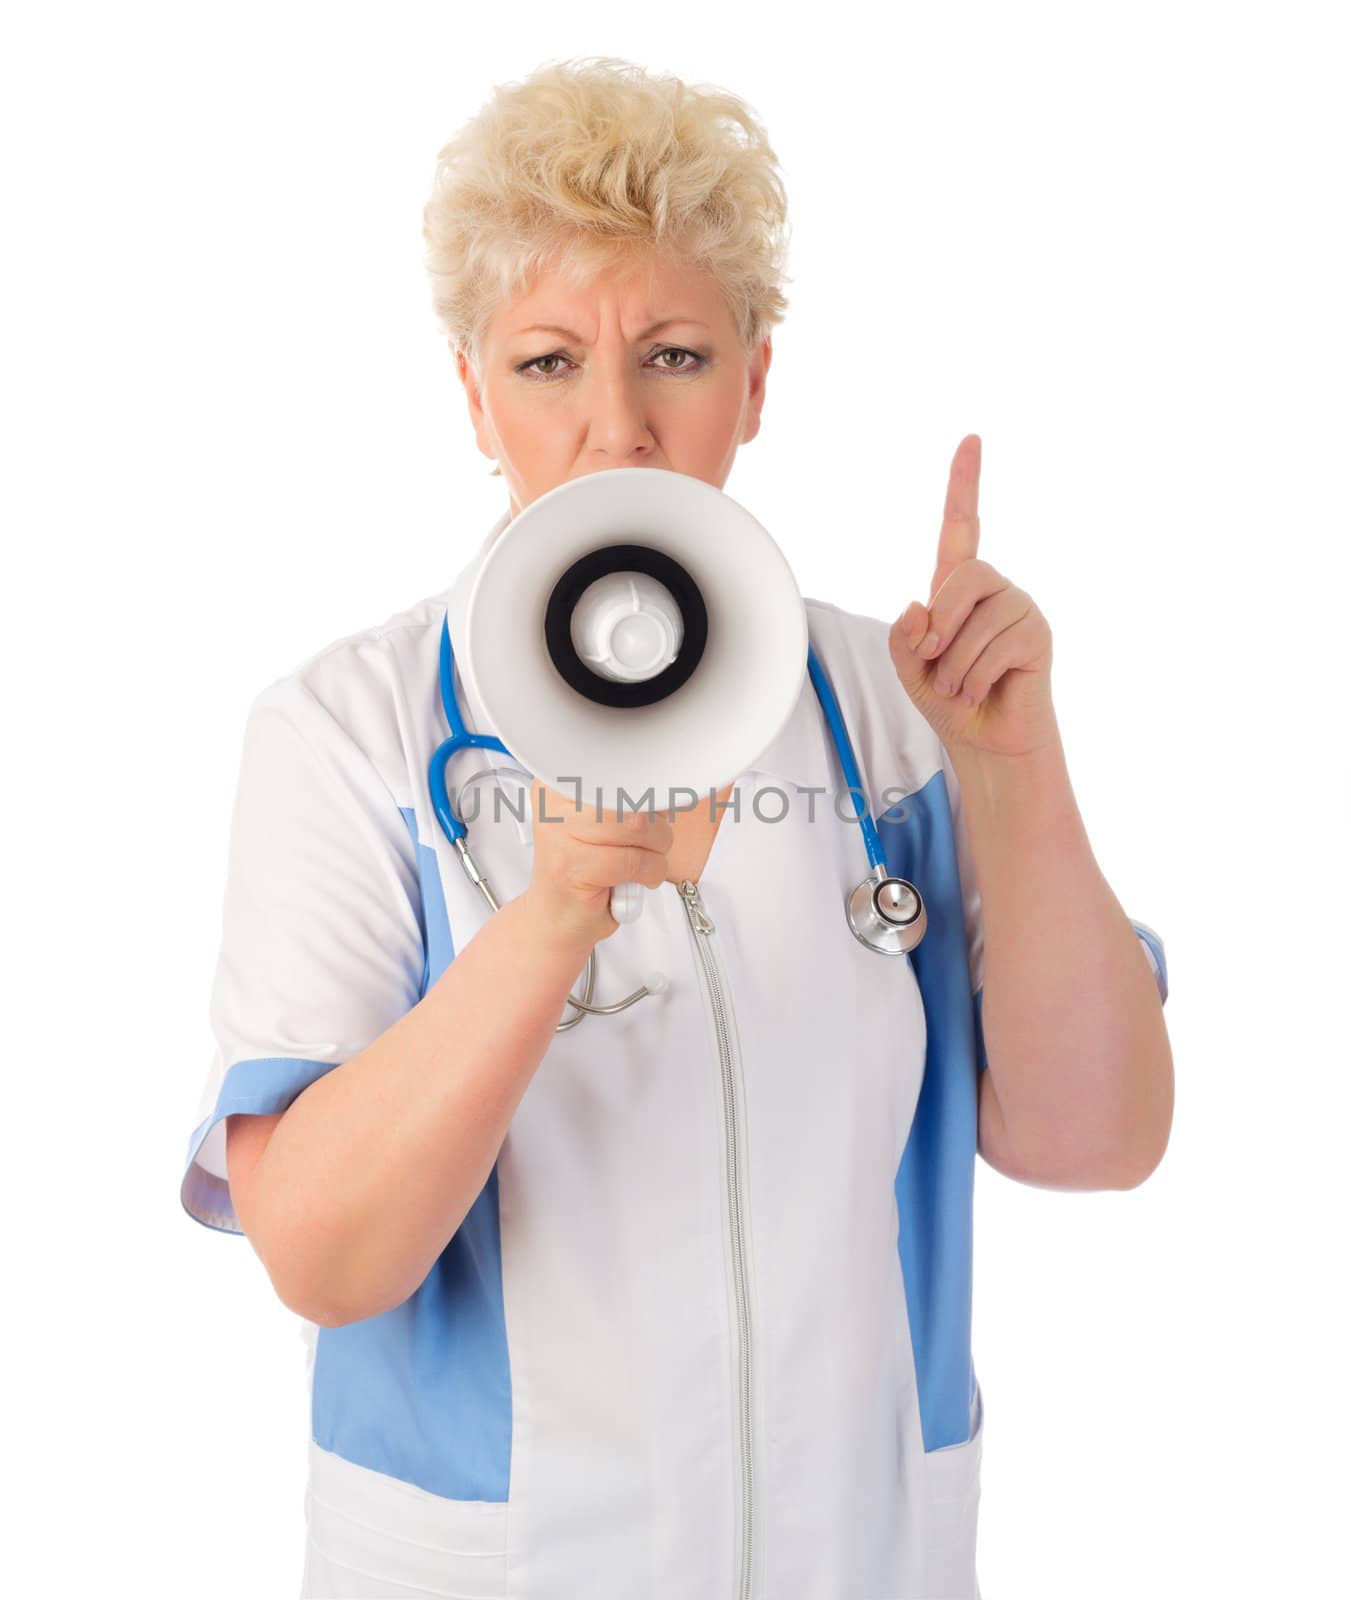 Mature doctor with bullhorn by rbv